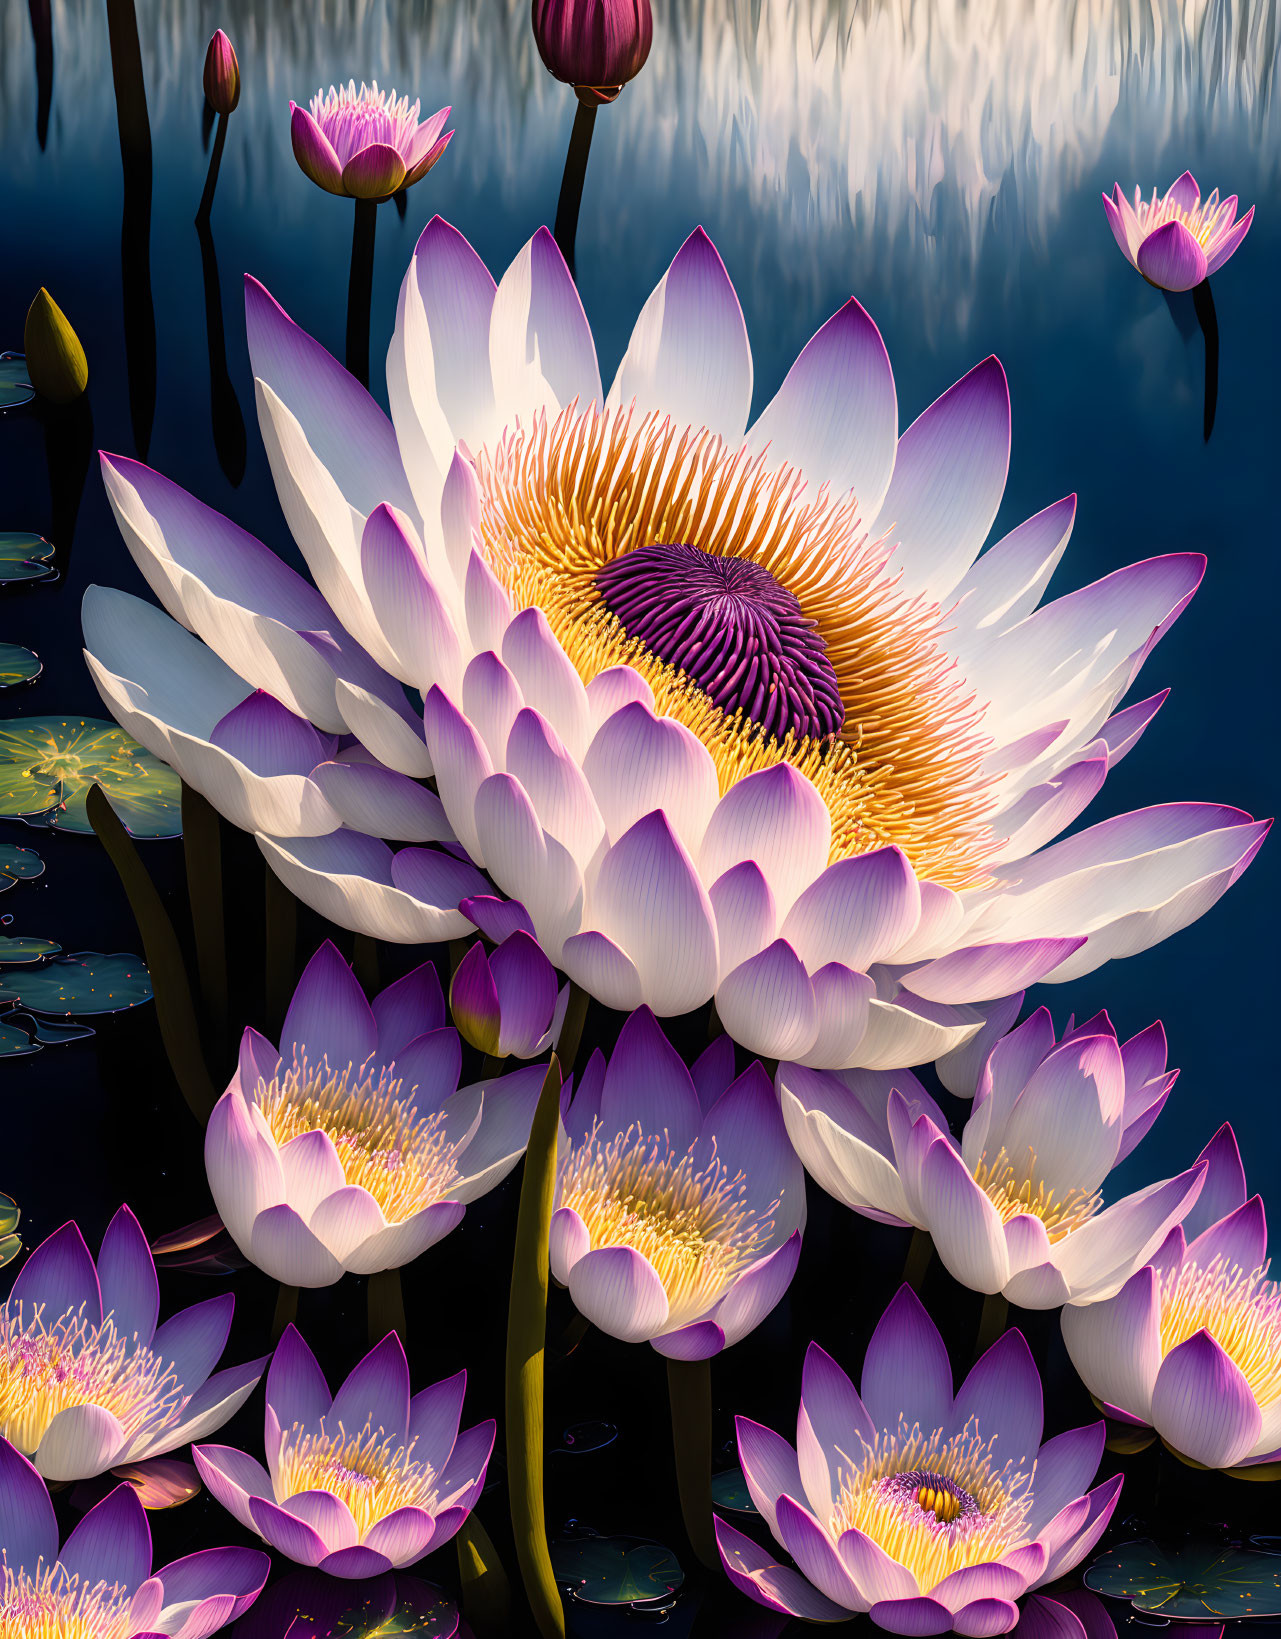 Colorful digital illustration of white and yellow water lily with purple lilies on dark water.